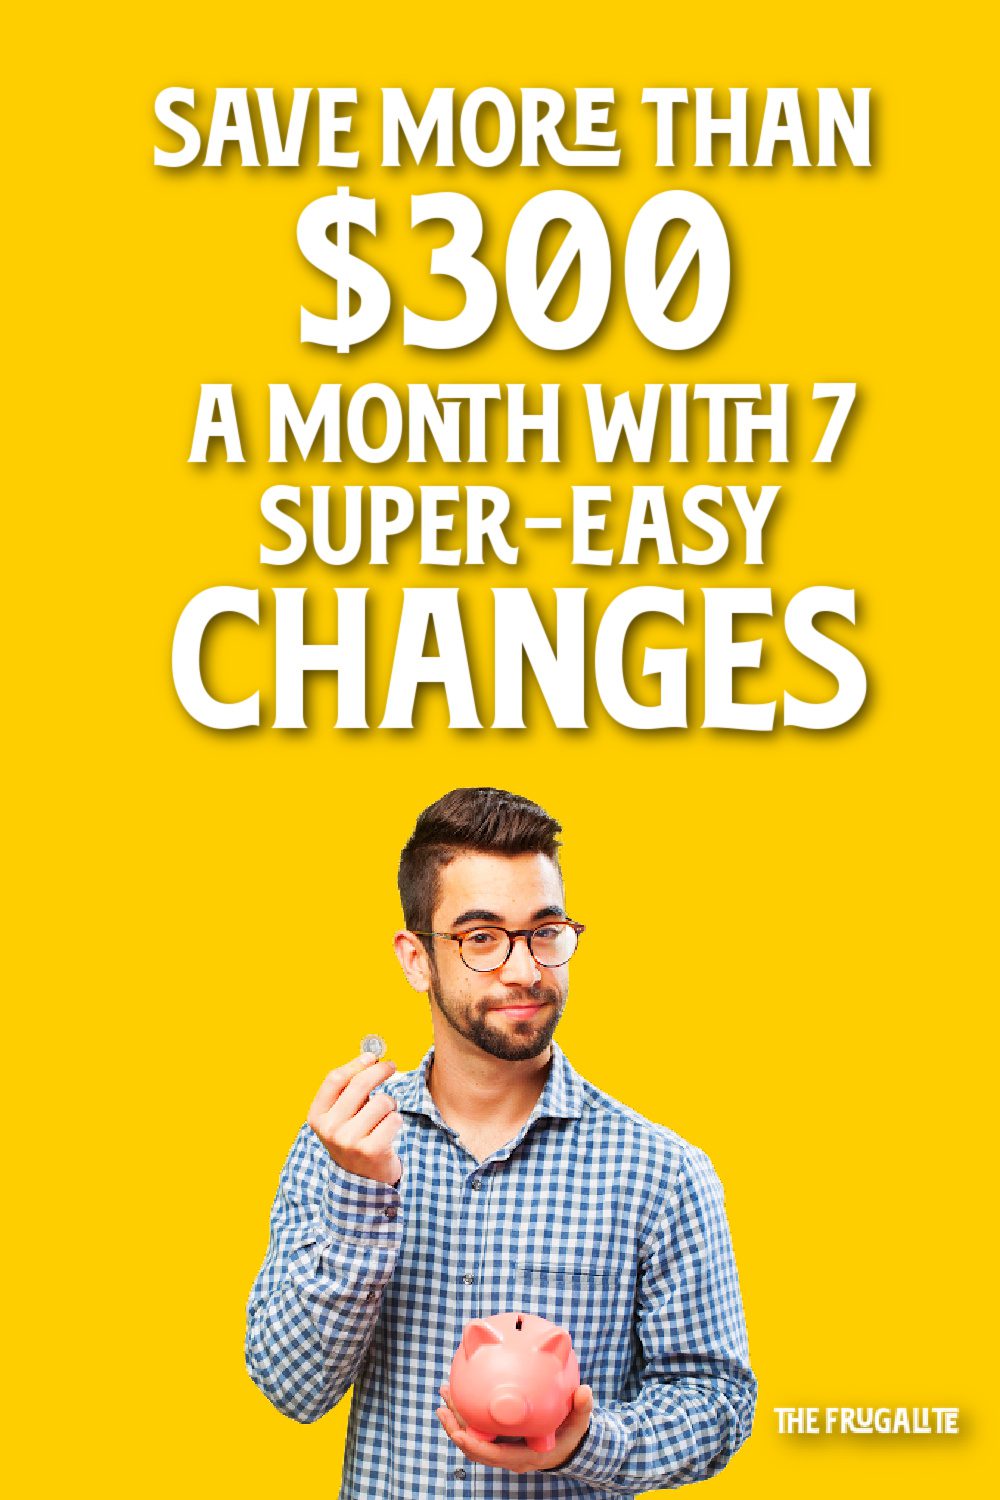 Save $300 a Month with 7 Super-Easy Changes